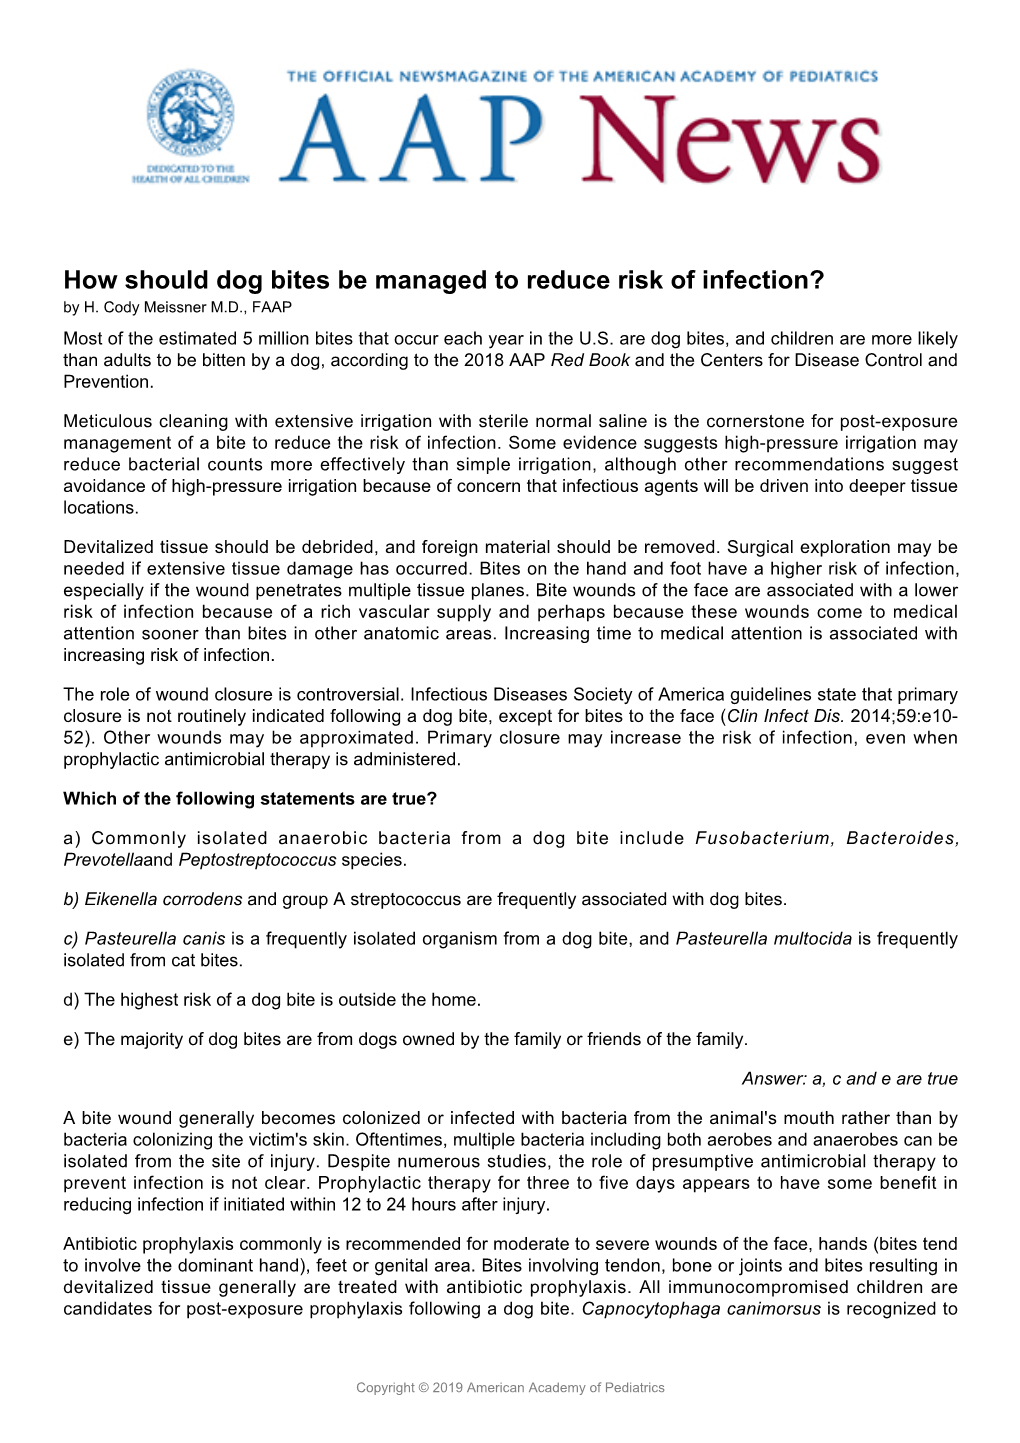 How Should Dog Bites Be Managed to Reduce Risk of Infection? by H